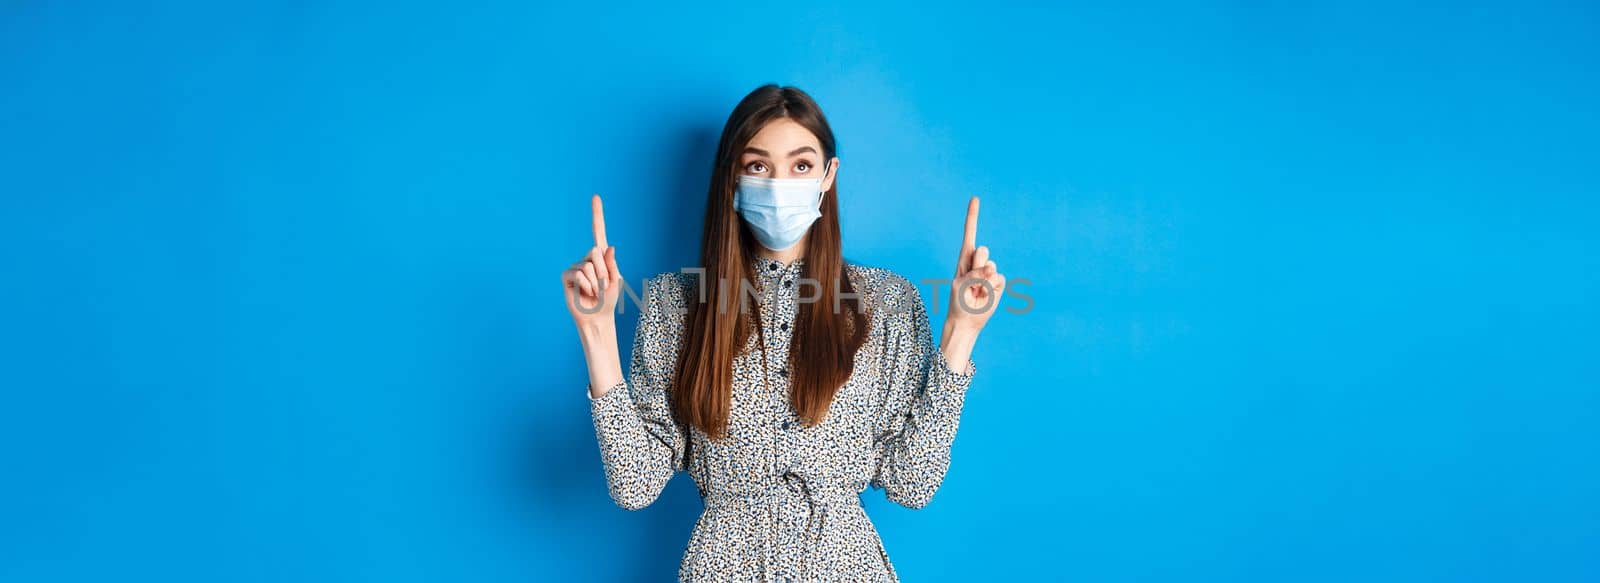 People, covid and quarantine concept. Intrigued young woman looking and pointing up at advertisement, standing in dress and face mask from coronavirus, blue background.